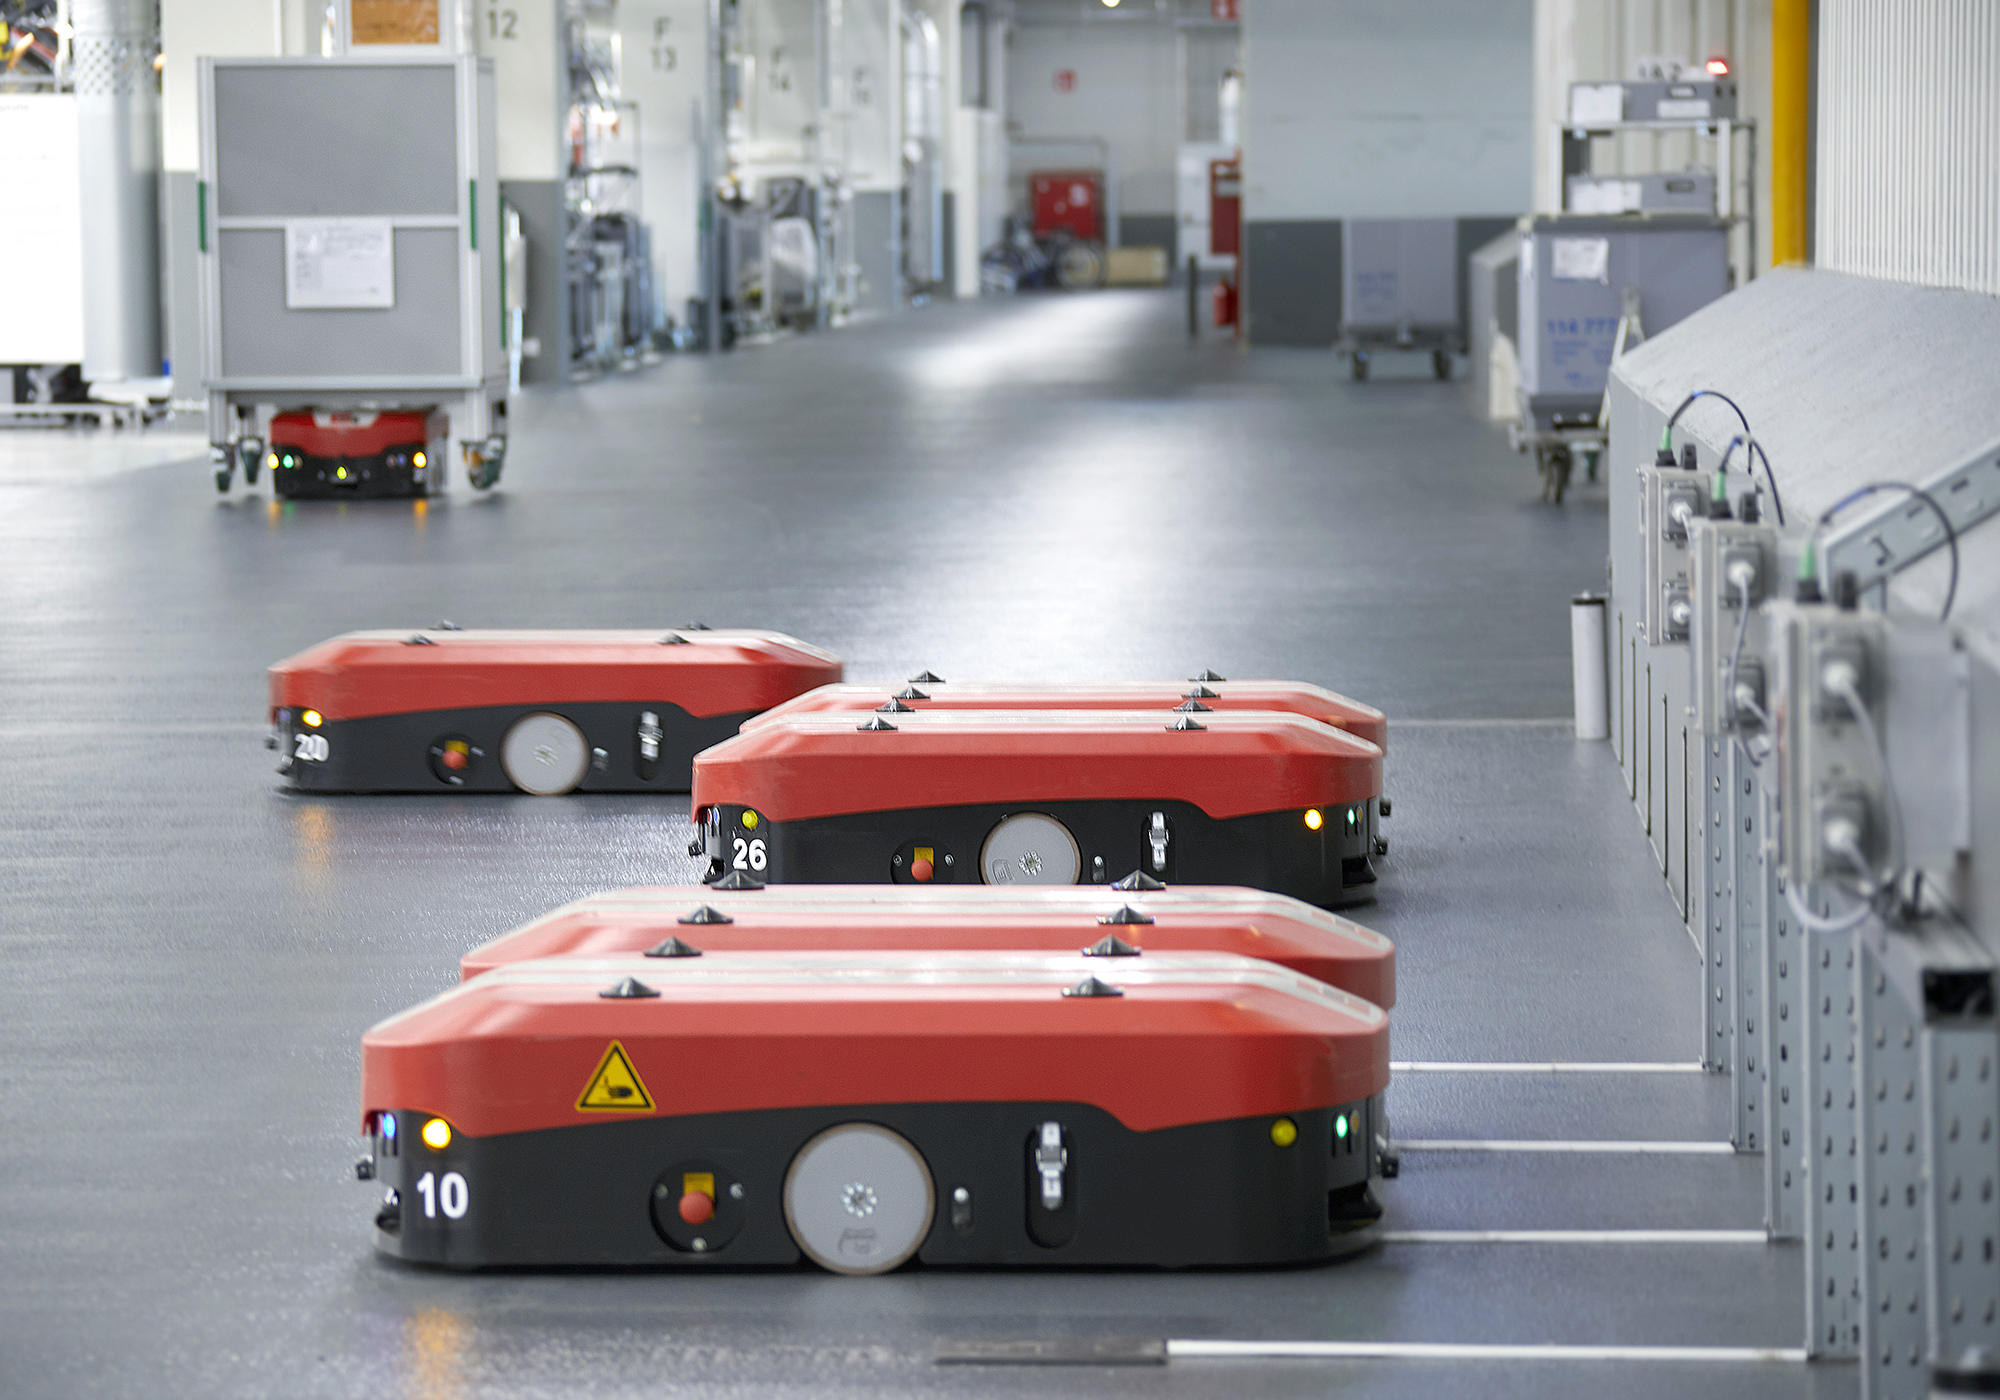 Grenzebach drives the automotive industry with their intralogistics solutions.